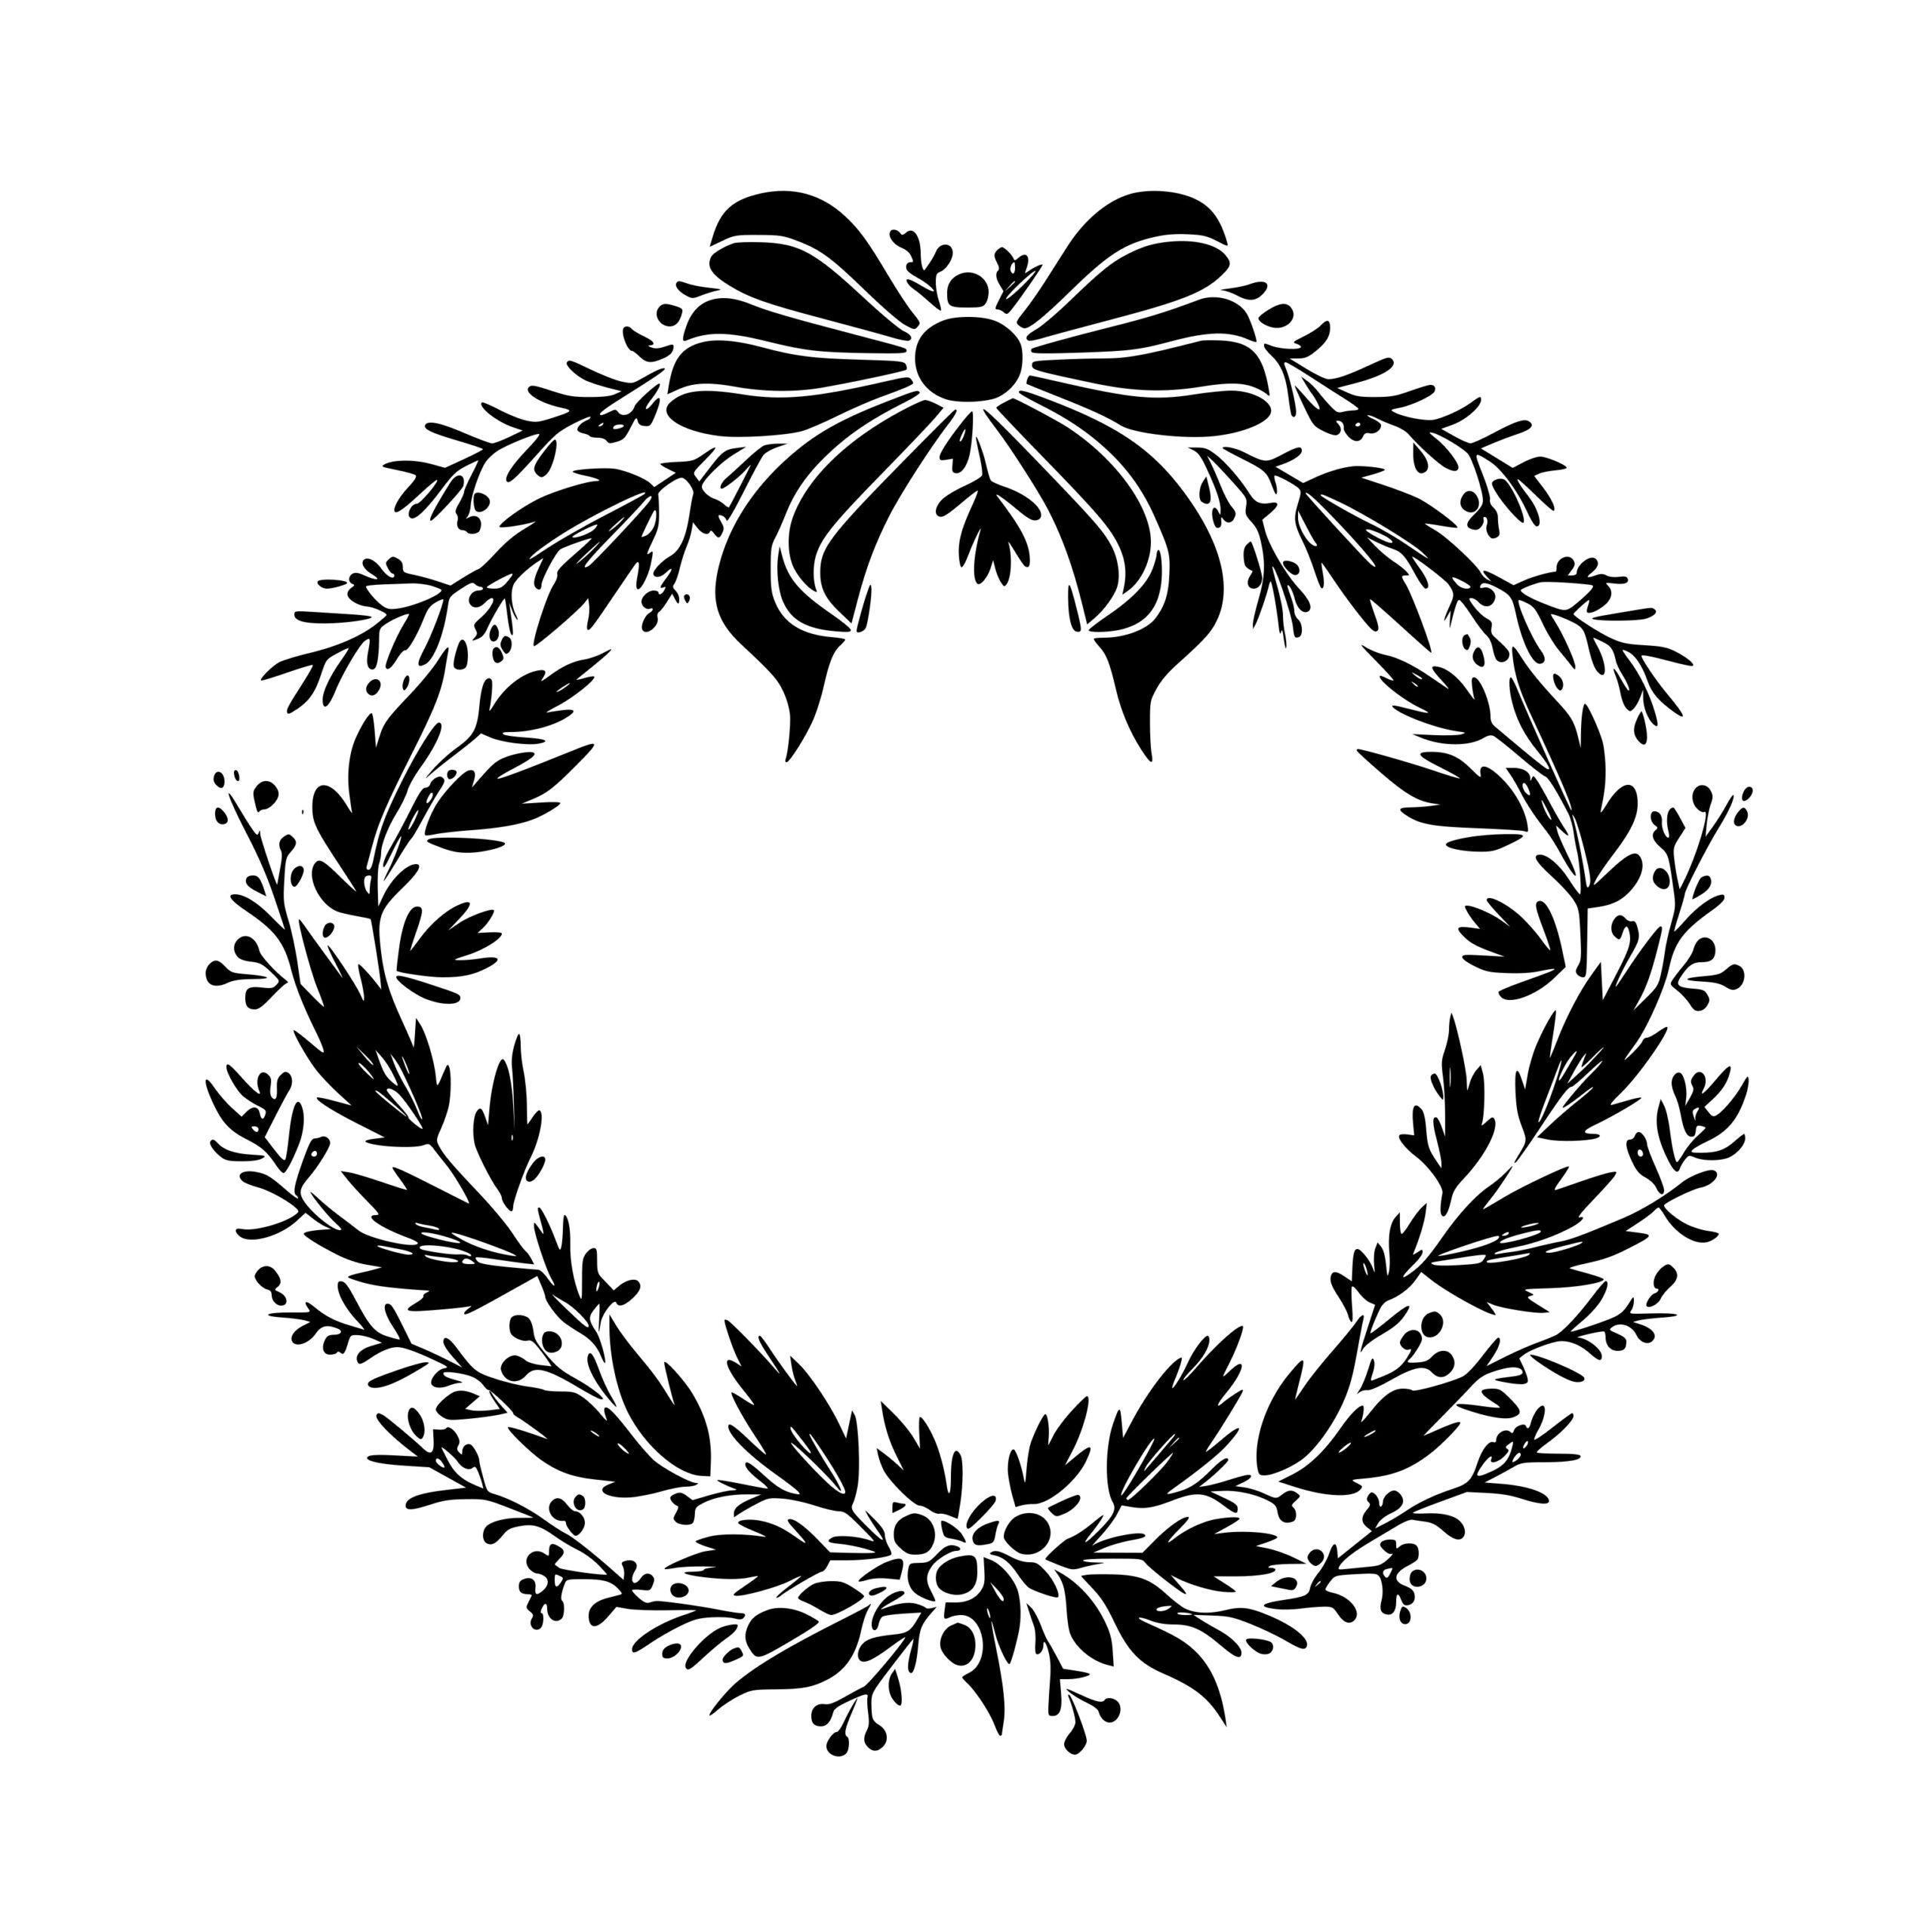 Instant Download SVG/PNG/DXF: Bow-tied Wreath for Cricut, Silhouette, Laser